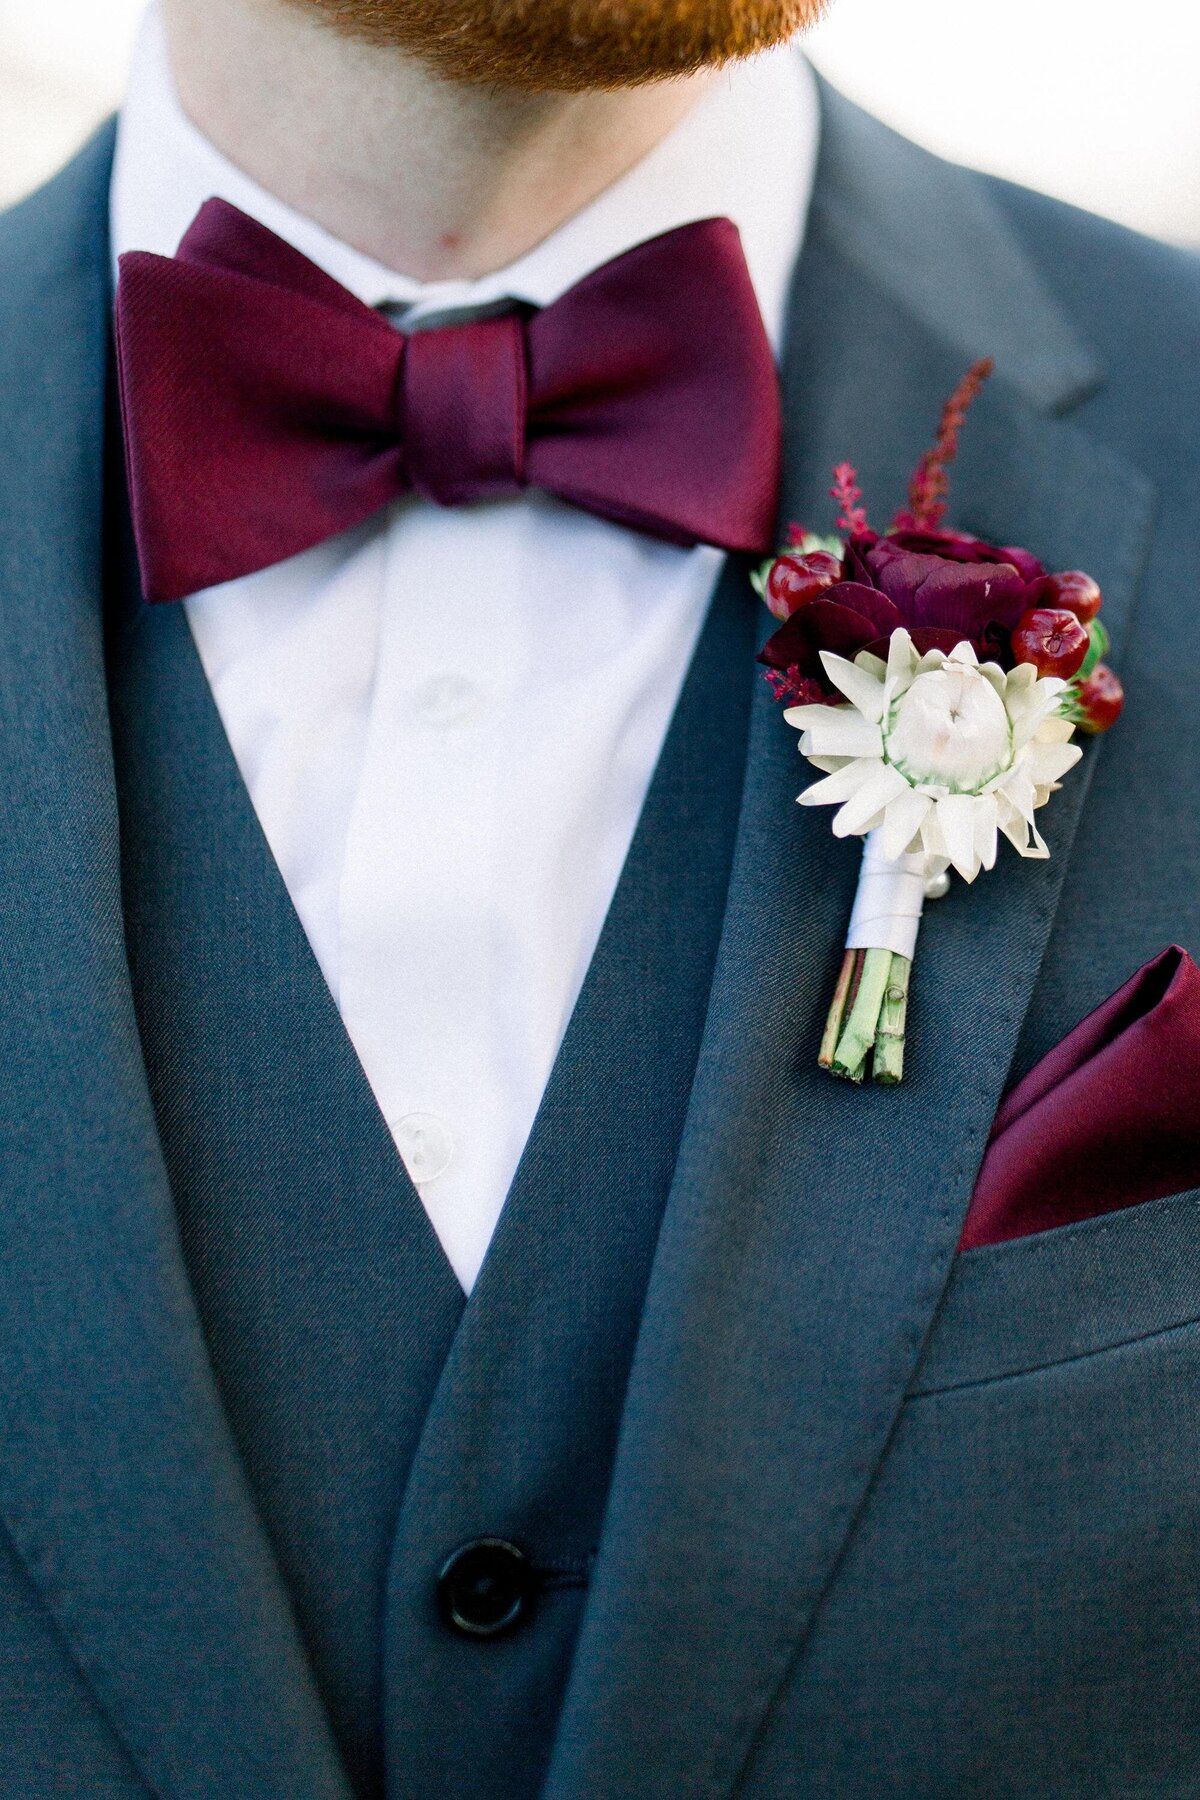 Groom wearing navy suit with burgundy bow tie featuring a white and burgundy boutonniere